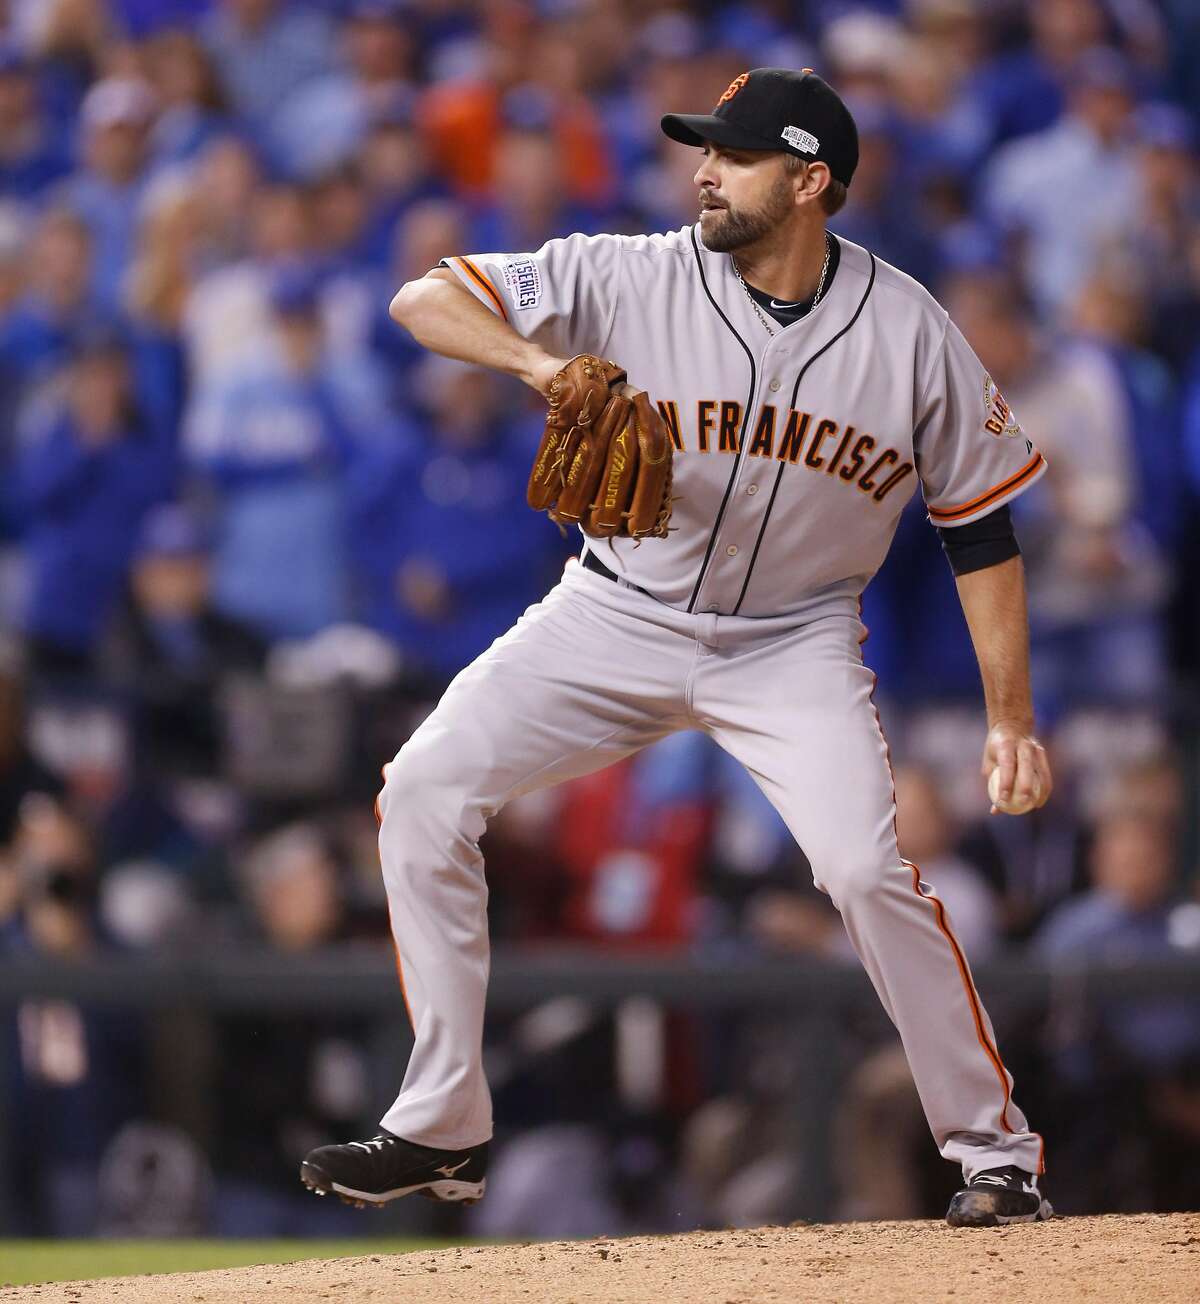 Giants Jeremy Affeldt pitches in the second inning during Game 7 of the World Series at Kauffman Stadium on Wednesday, Oct. 29, 2014 in Kansas City, Mo.